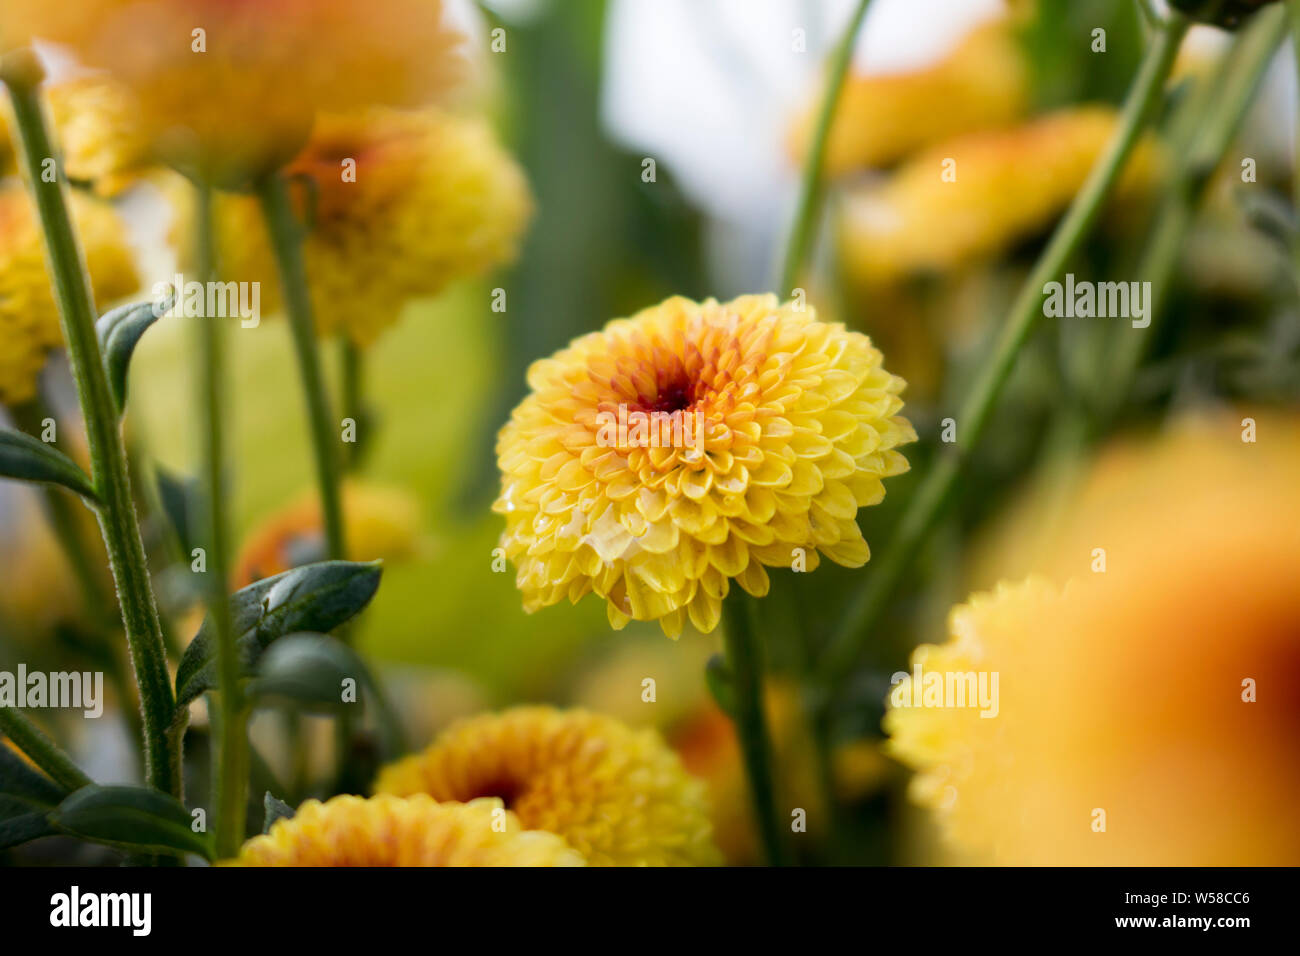 Close up of single Lollipop Yellow Chrysanthemum blossom in full bloom with water drops. Blurry background. Stock Photo